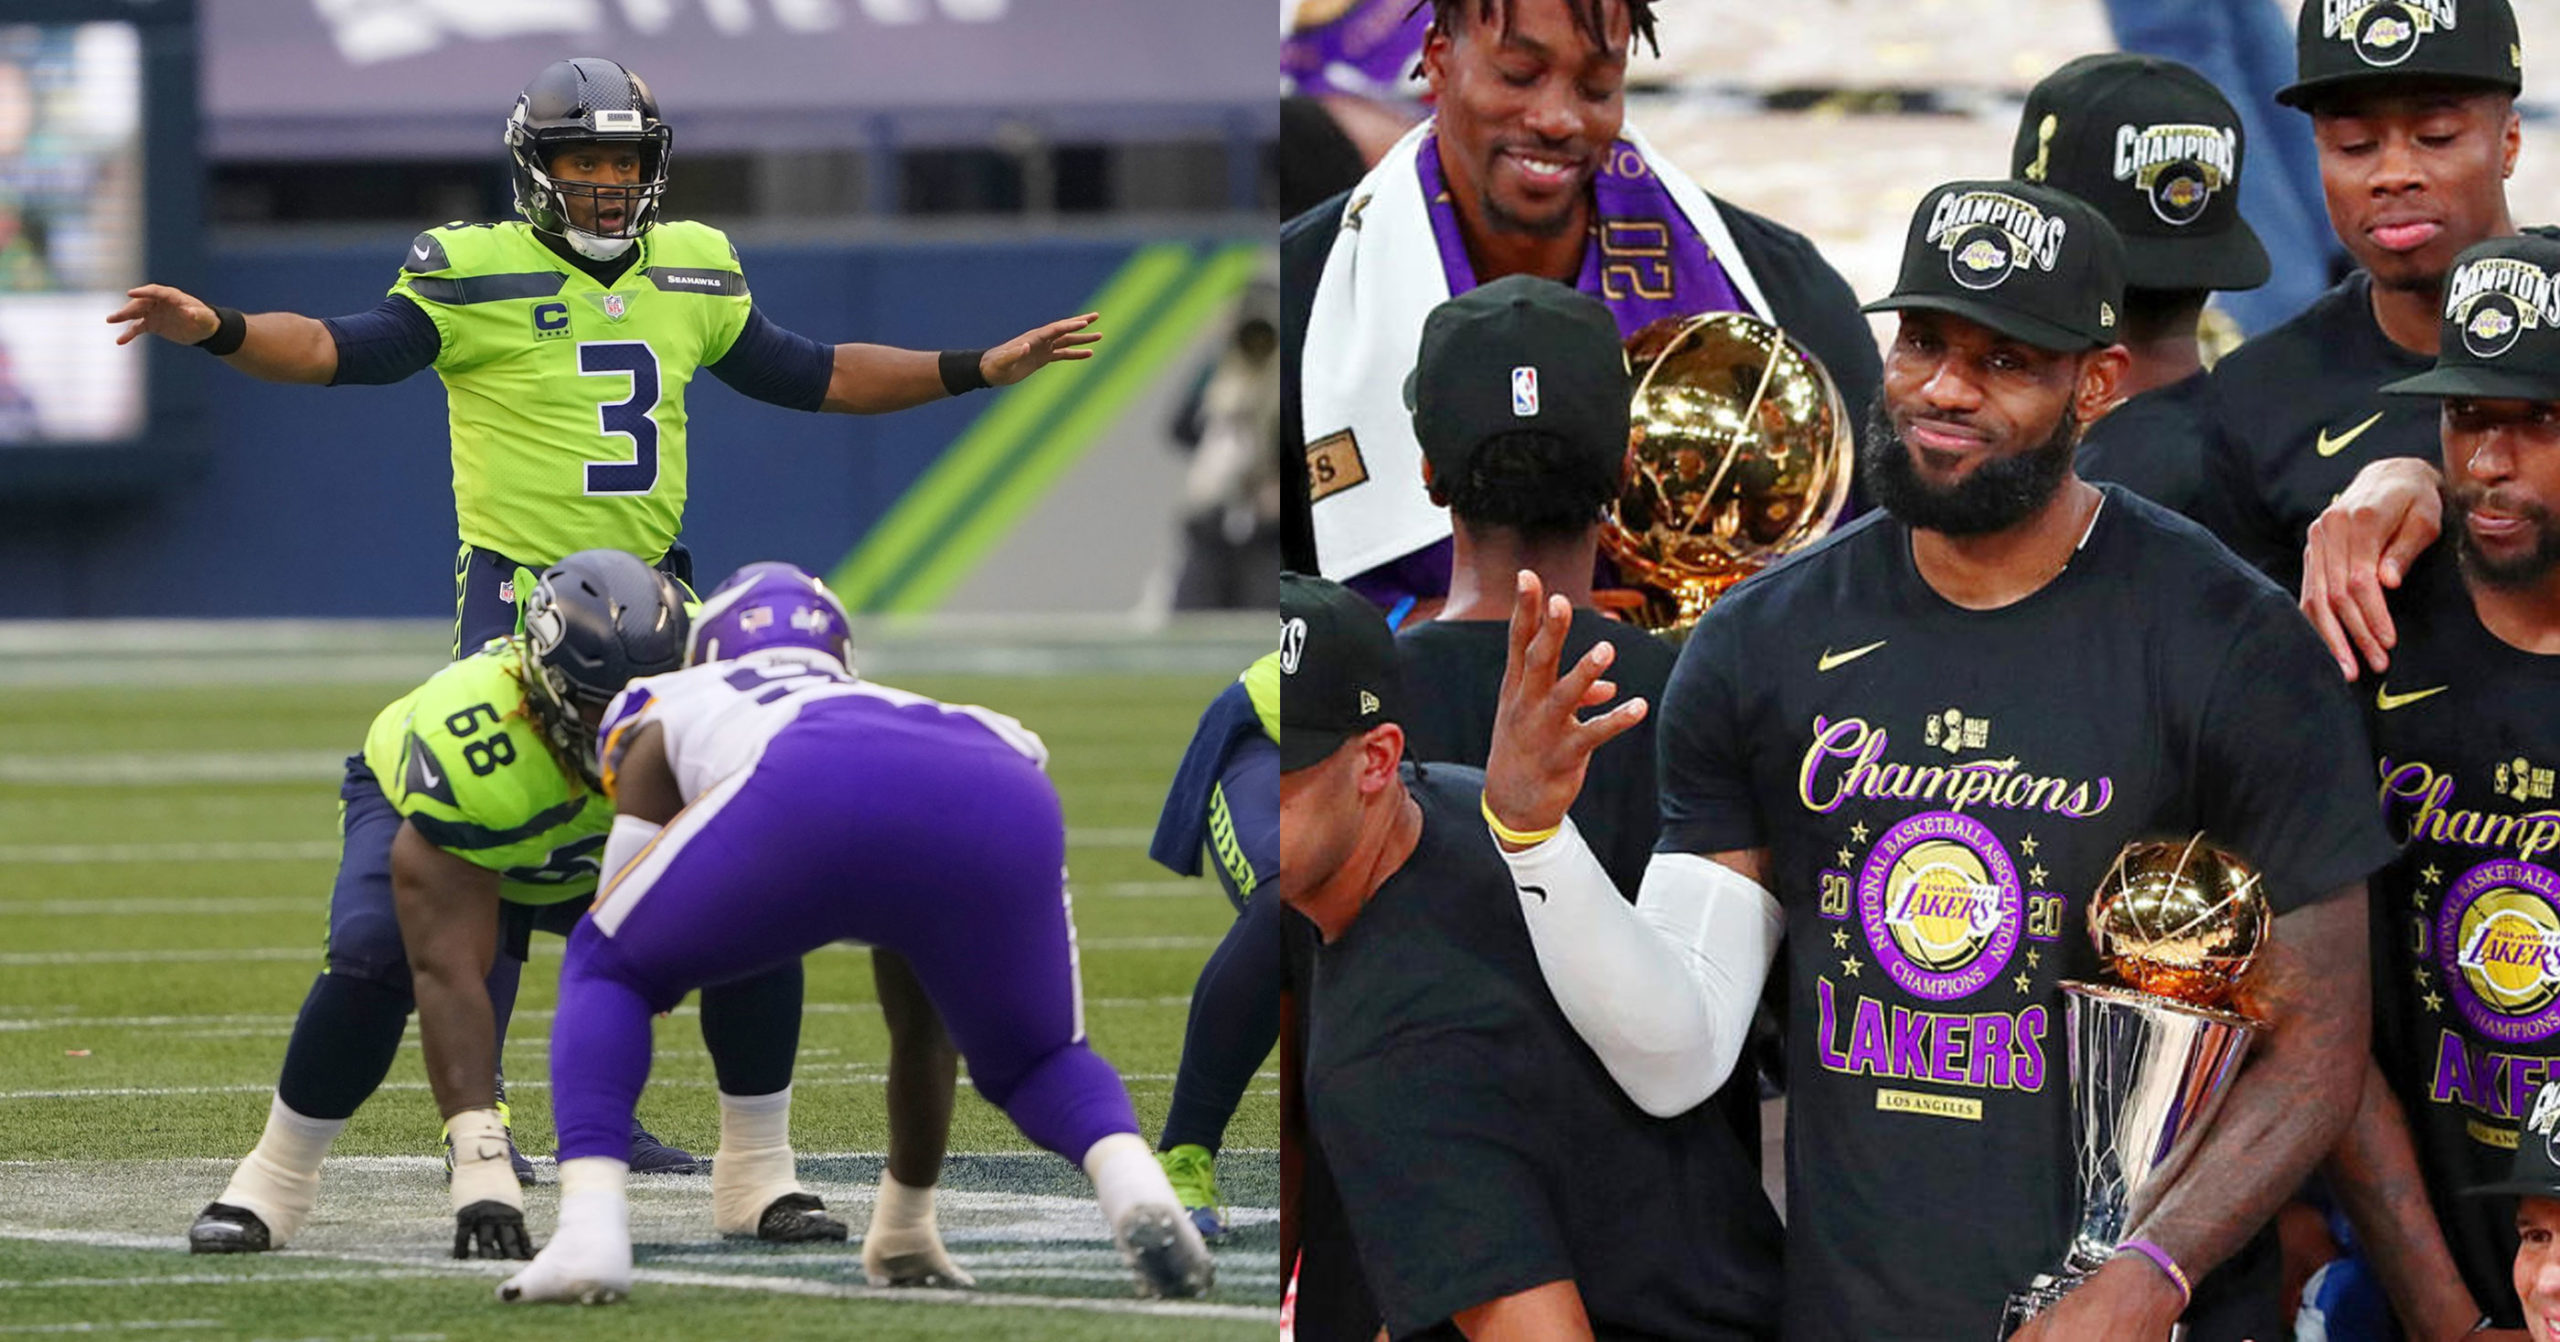 Vikings-Seahawks Week 5 Game More Than Doubled Amount Of Viewers For NBA Finals Game 6